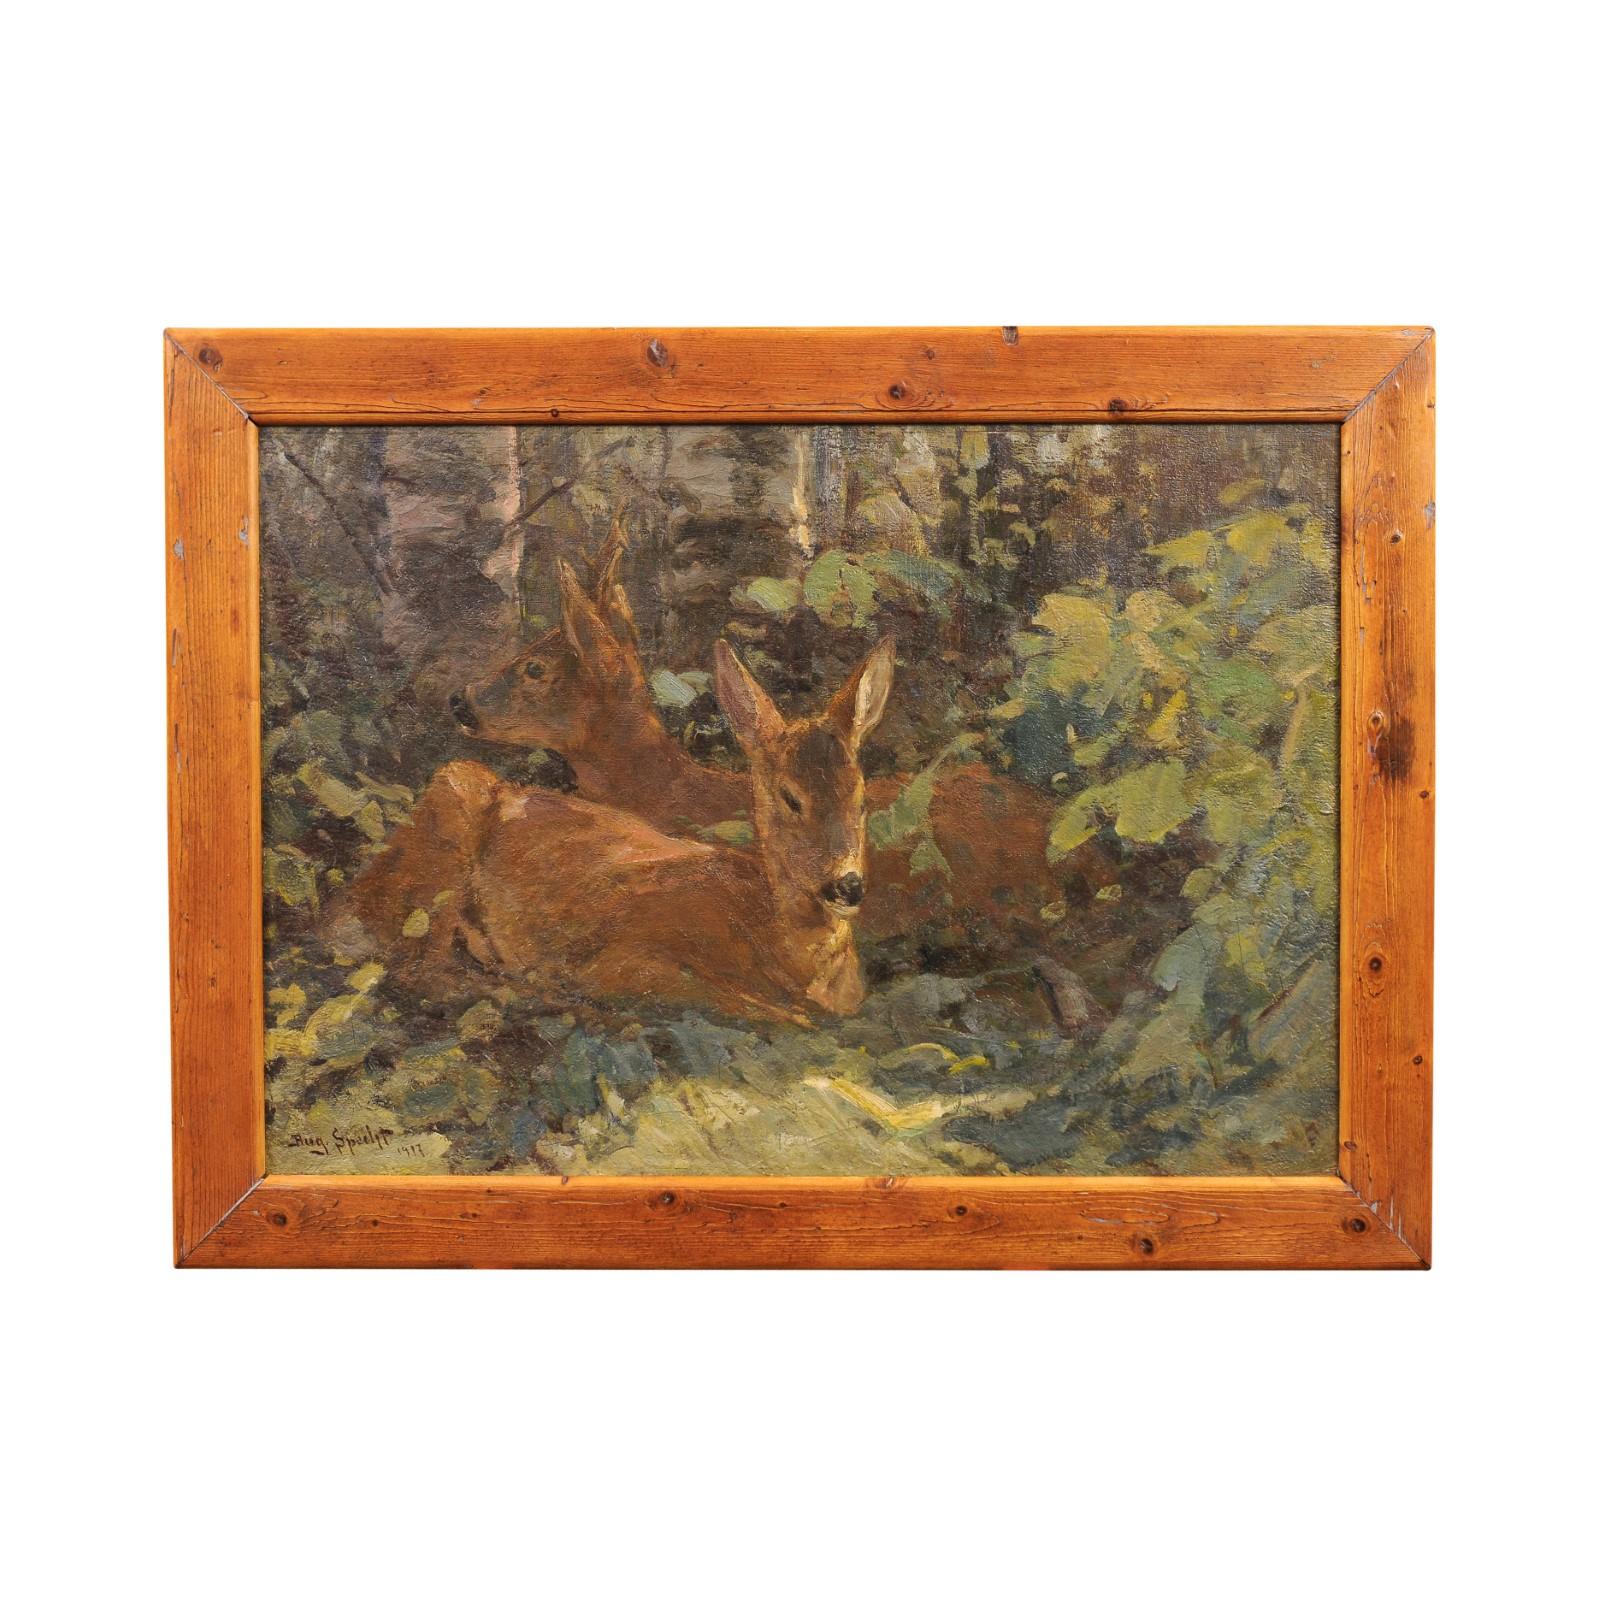 A German oil on canvas board painting from the early 20th century by August Specht, titled Deer in the Woods in old fir tree frame. Created in Germany during the first quarter of the 20th century, this oil on canvas board painting depicts the